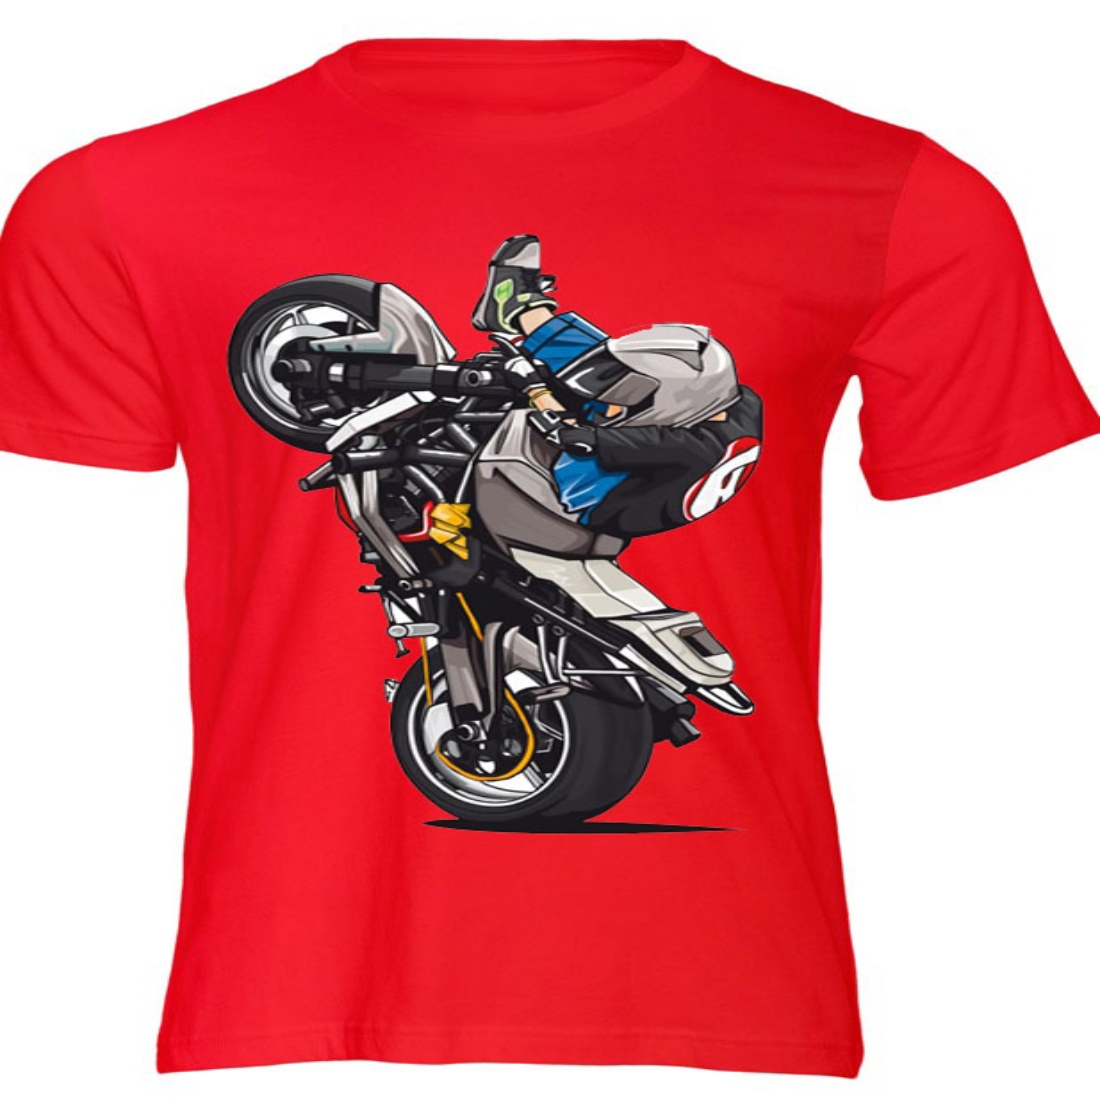 MOTO GP DESINGS IN 7 DIFFERENT COLORS preview image.